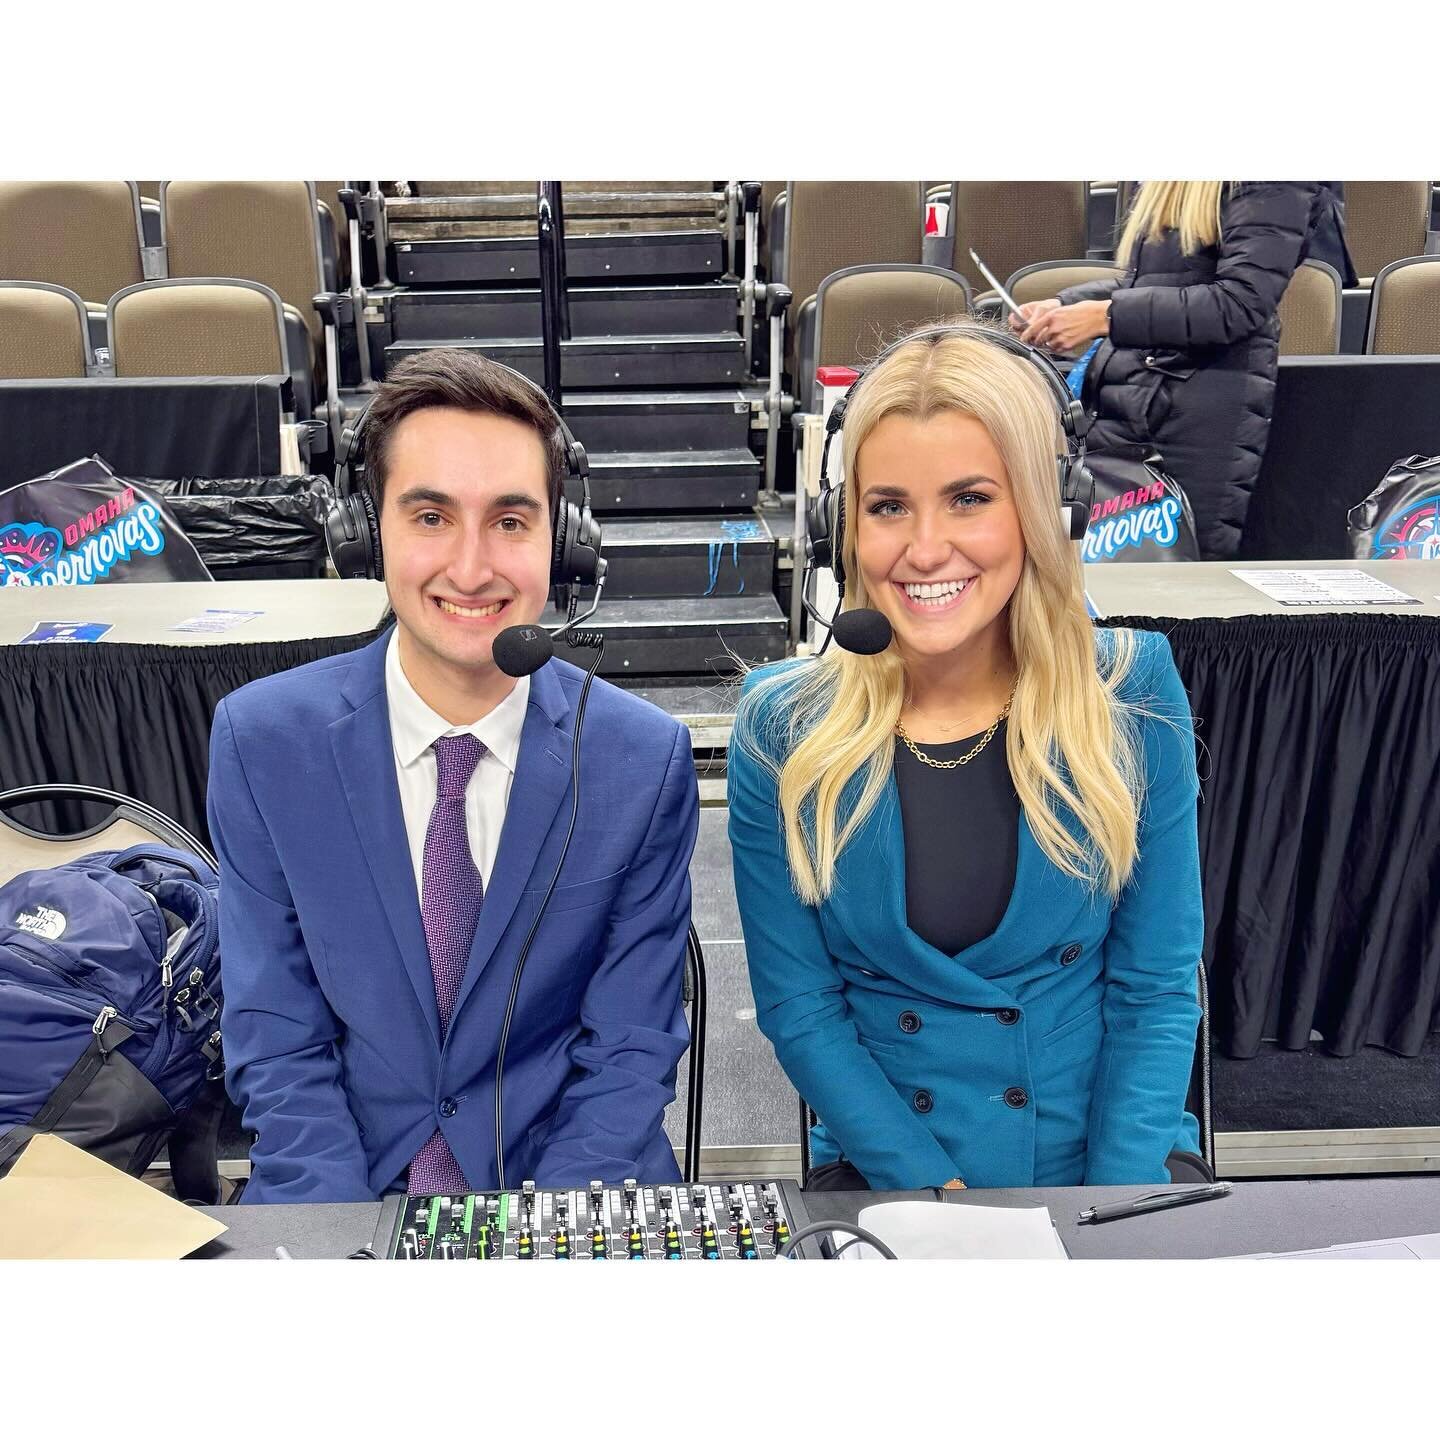 Another day, another record broken!!🥳 I couldn&rsquo;t be more thankful to have had the chance to call @realprovb&rsquo;s opening match in front of 11,624 fans &mdash; a U.S. professional women&rsquo;s volleyball attendance record. LET&rsquo;S KEEP 